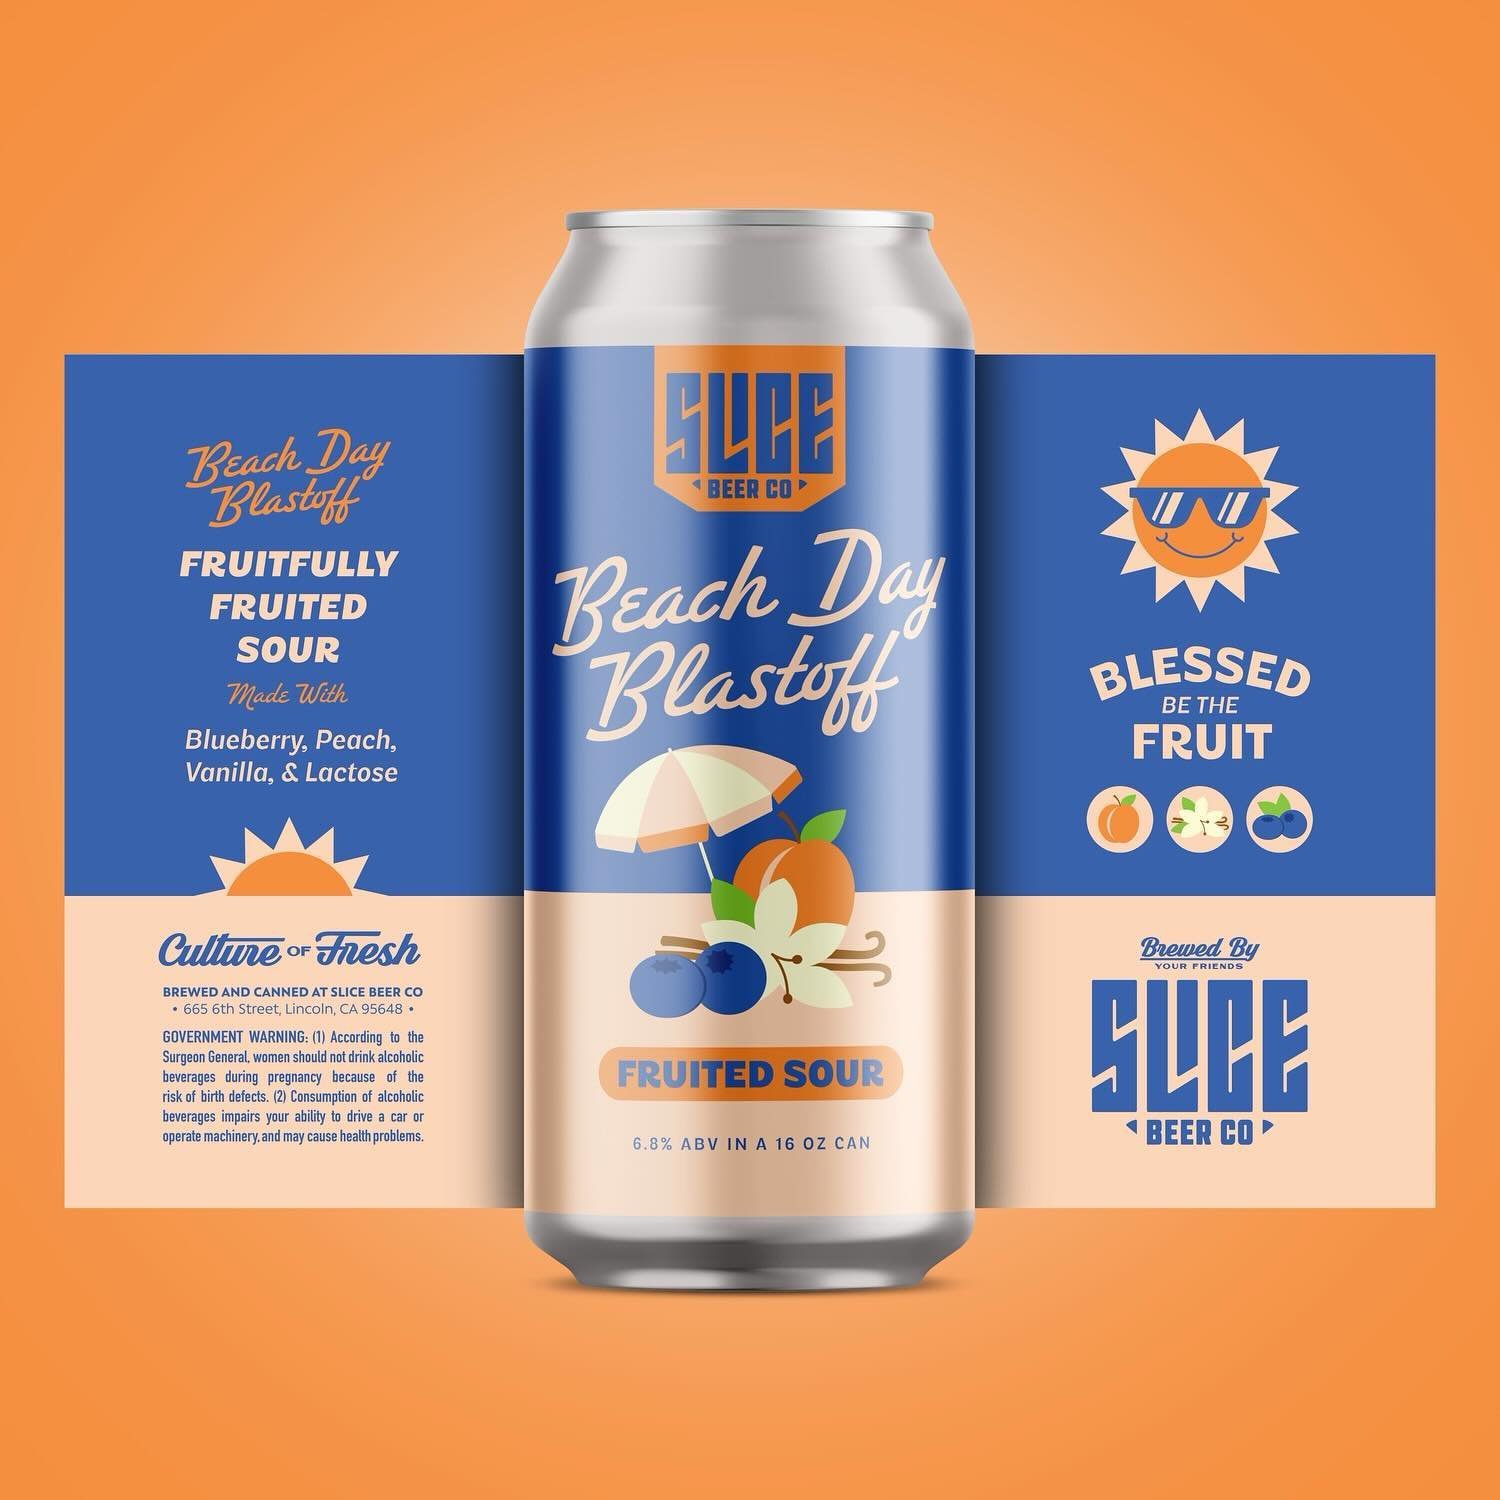 Hold onto your beach hats and buckle up for the start to your summer adventure this Friday May 17th with &ldquo;Beach Day Blastoff&rdquo;! This Fruited Sour is the ultimate ticket to a fruity flavor fiesta, thanks to an outrageous payload of blueberr